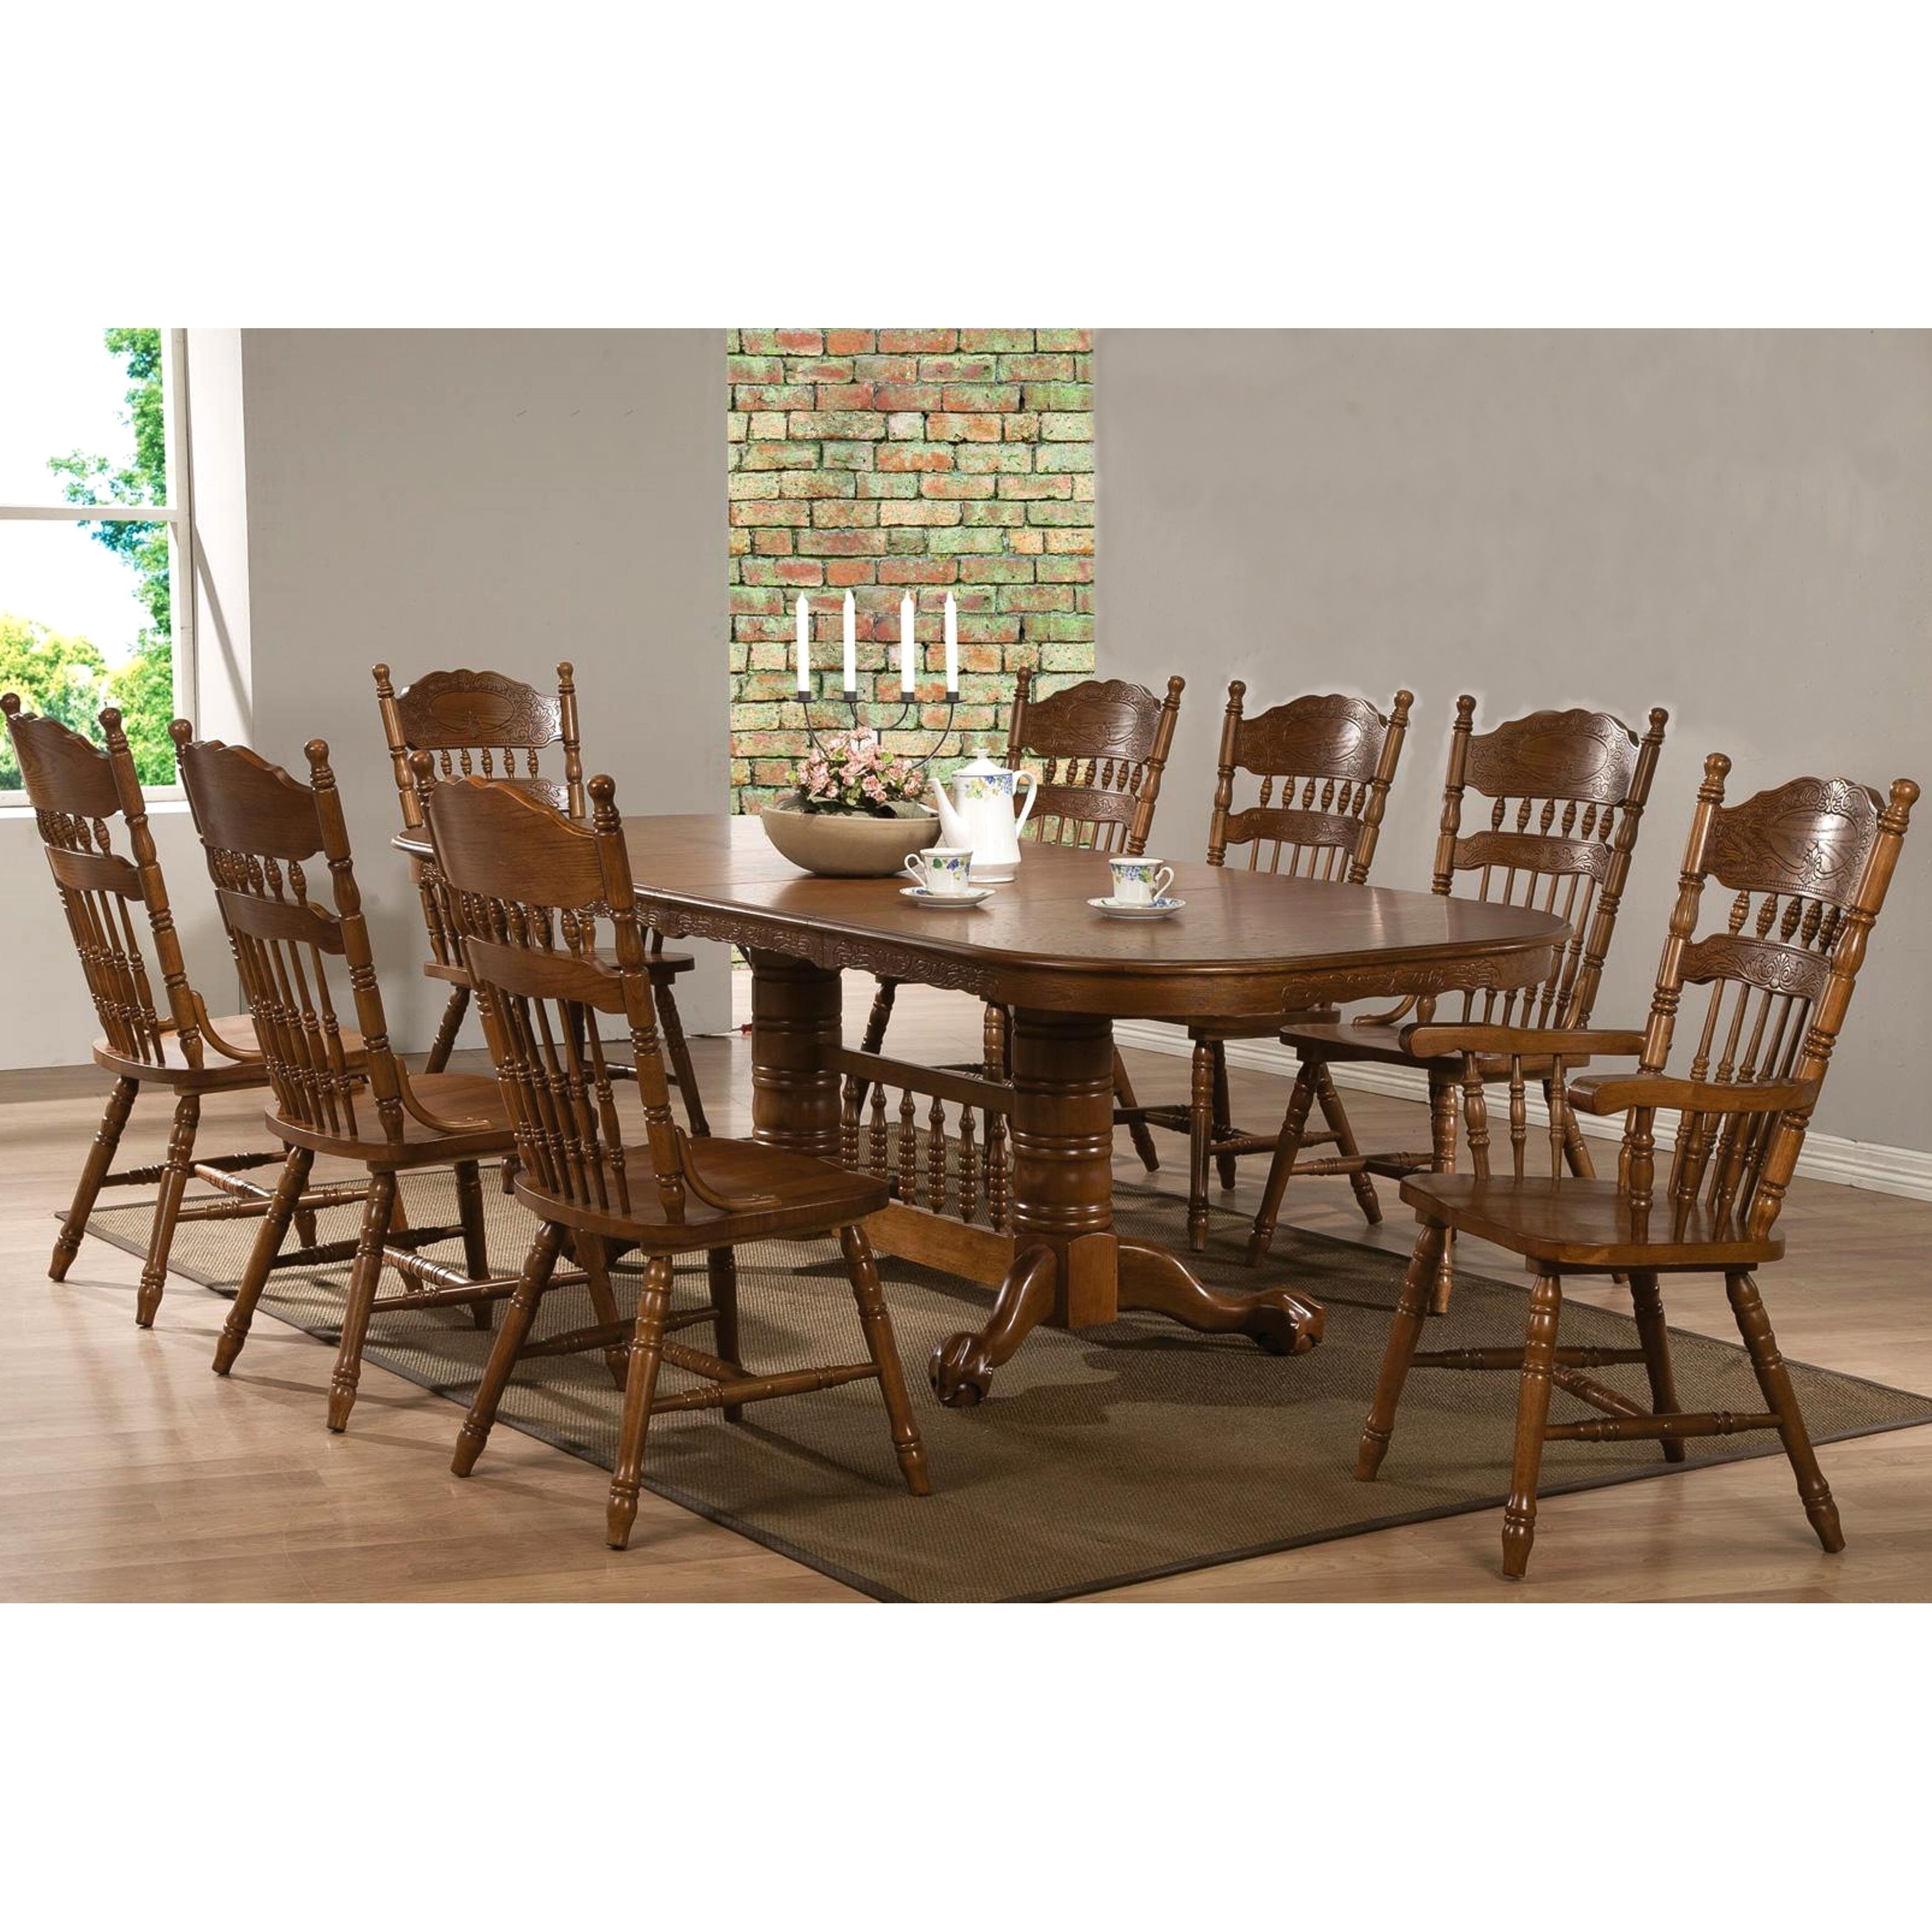 Trieste Windsor Country Style Dining Set   16414481  